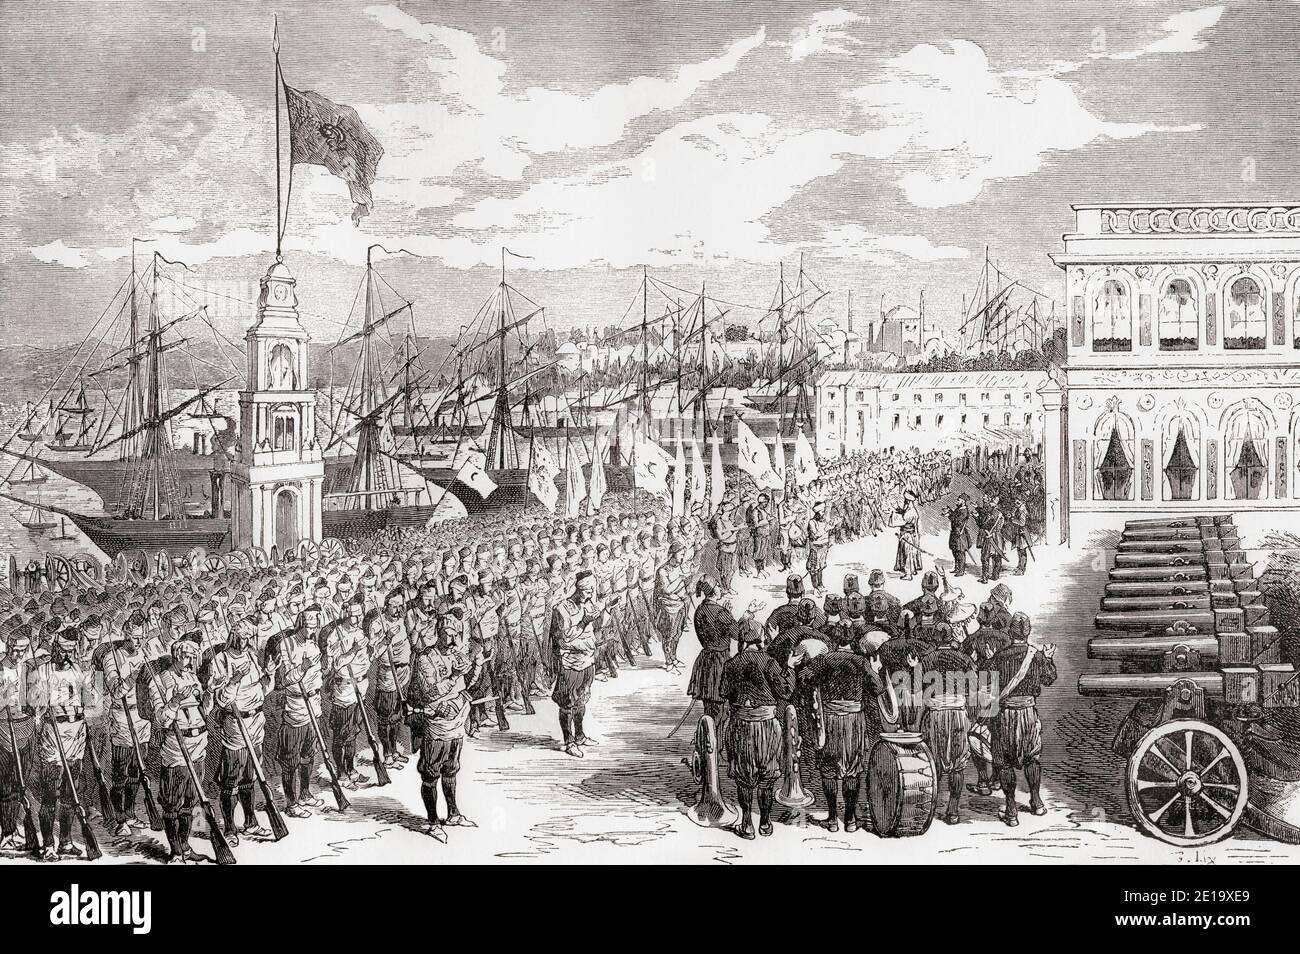 The battalions of the Batumi army disembarking at Trabzon aka Trebizond, Turkey, during the Russo-Turkish War (1877–1878).  From Russes et Turcs, La Guerre D'Orient, published 1878 Stock Photo